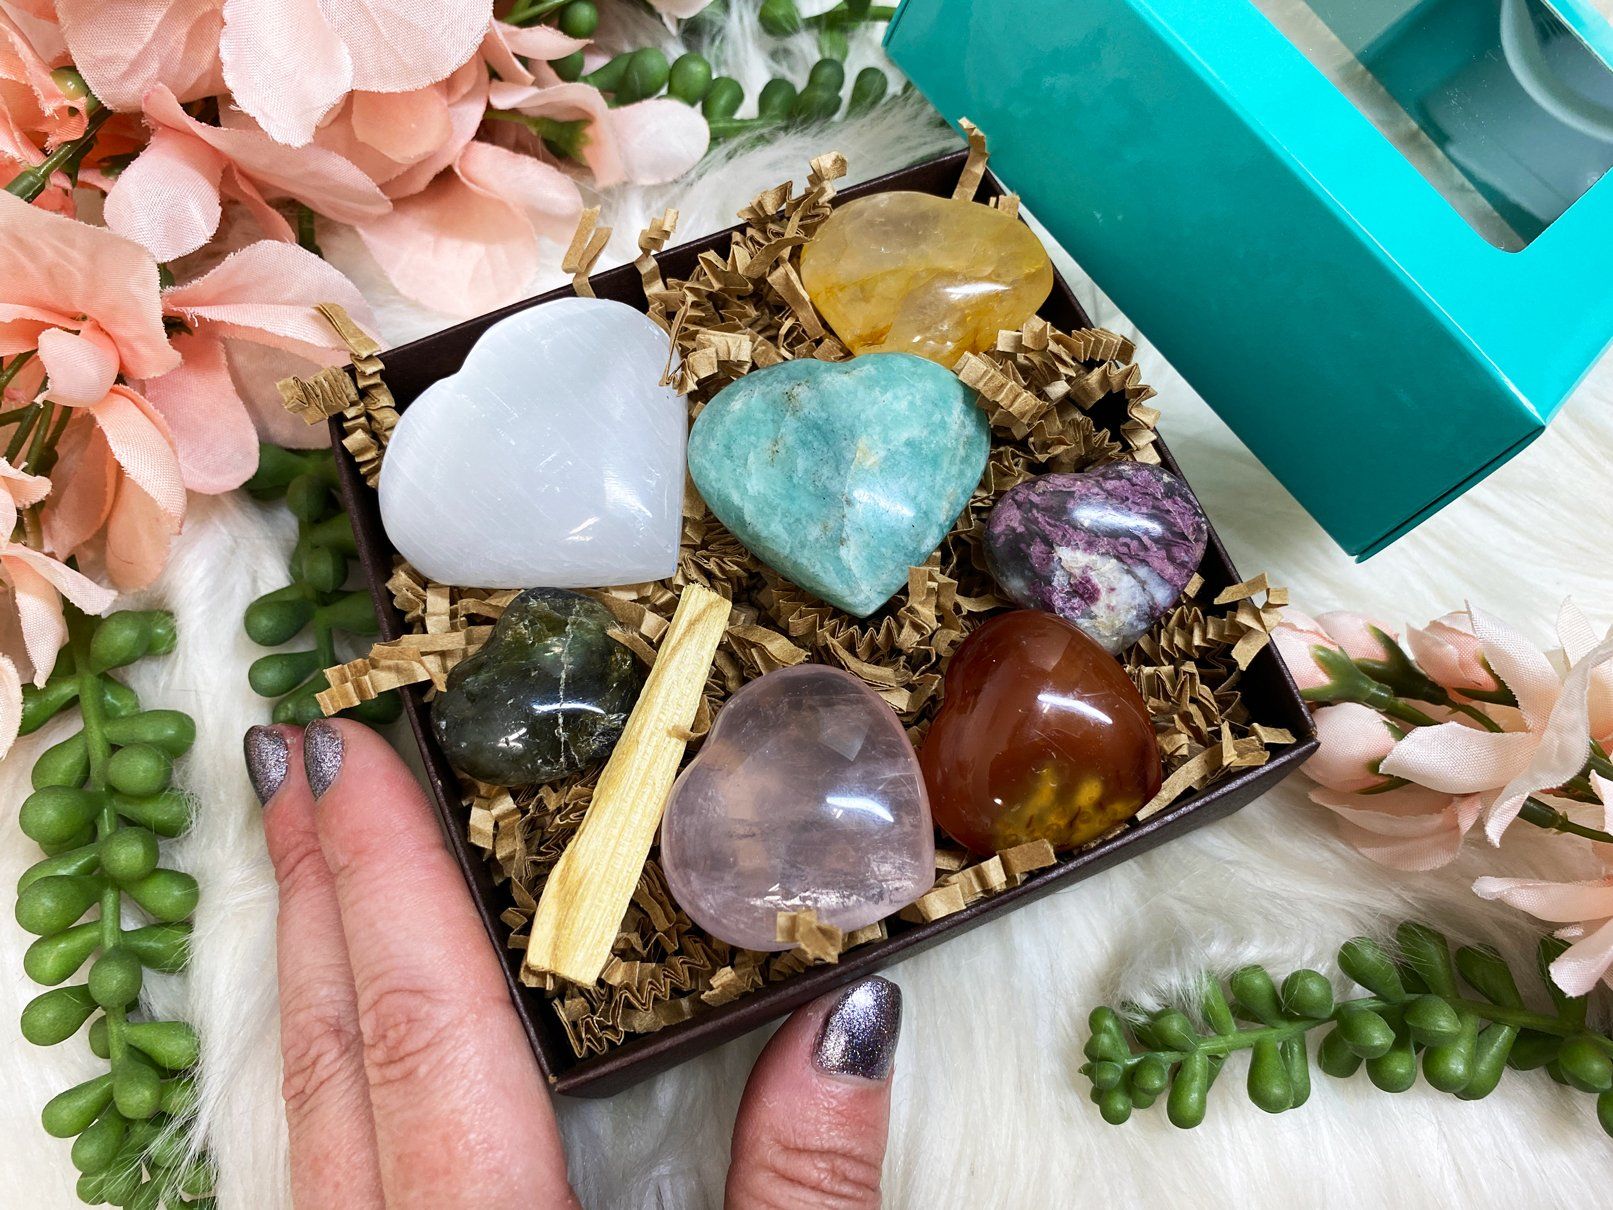 The Amazonite stone, heart-shaped on a box with other different stones as a gift, with a girl's hand holding it